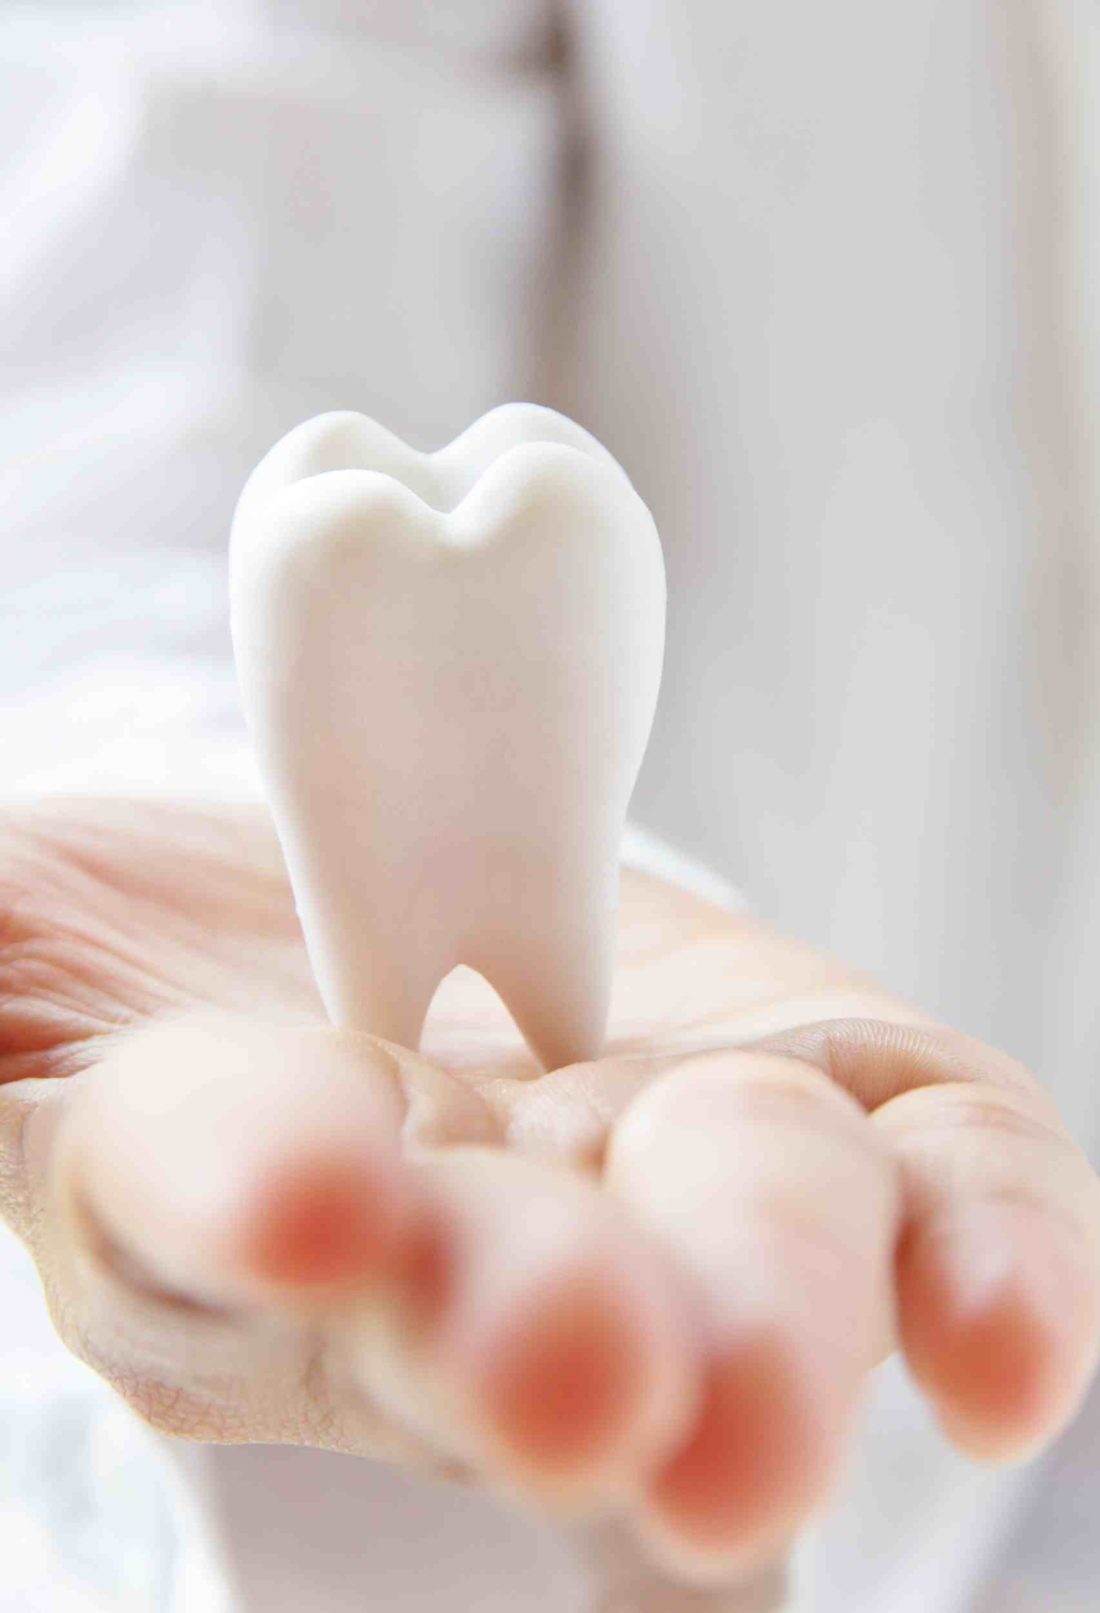 Revitalize Your Smile With These Natural-Looking Dental Solutions